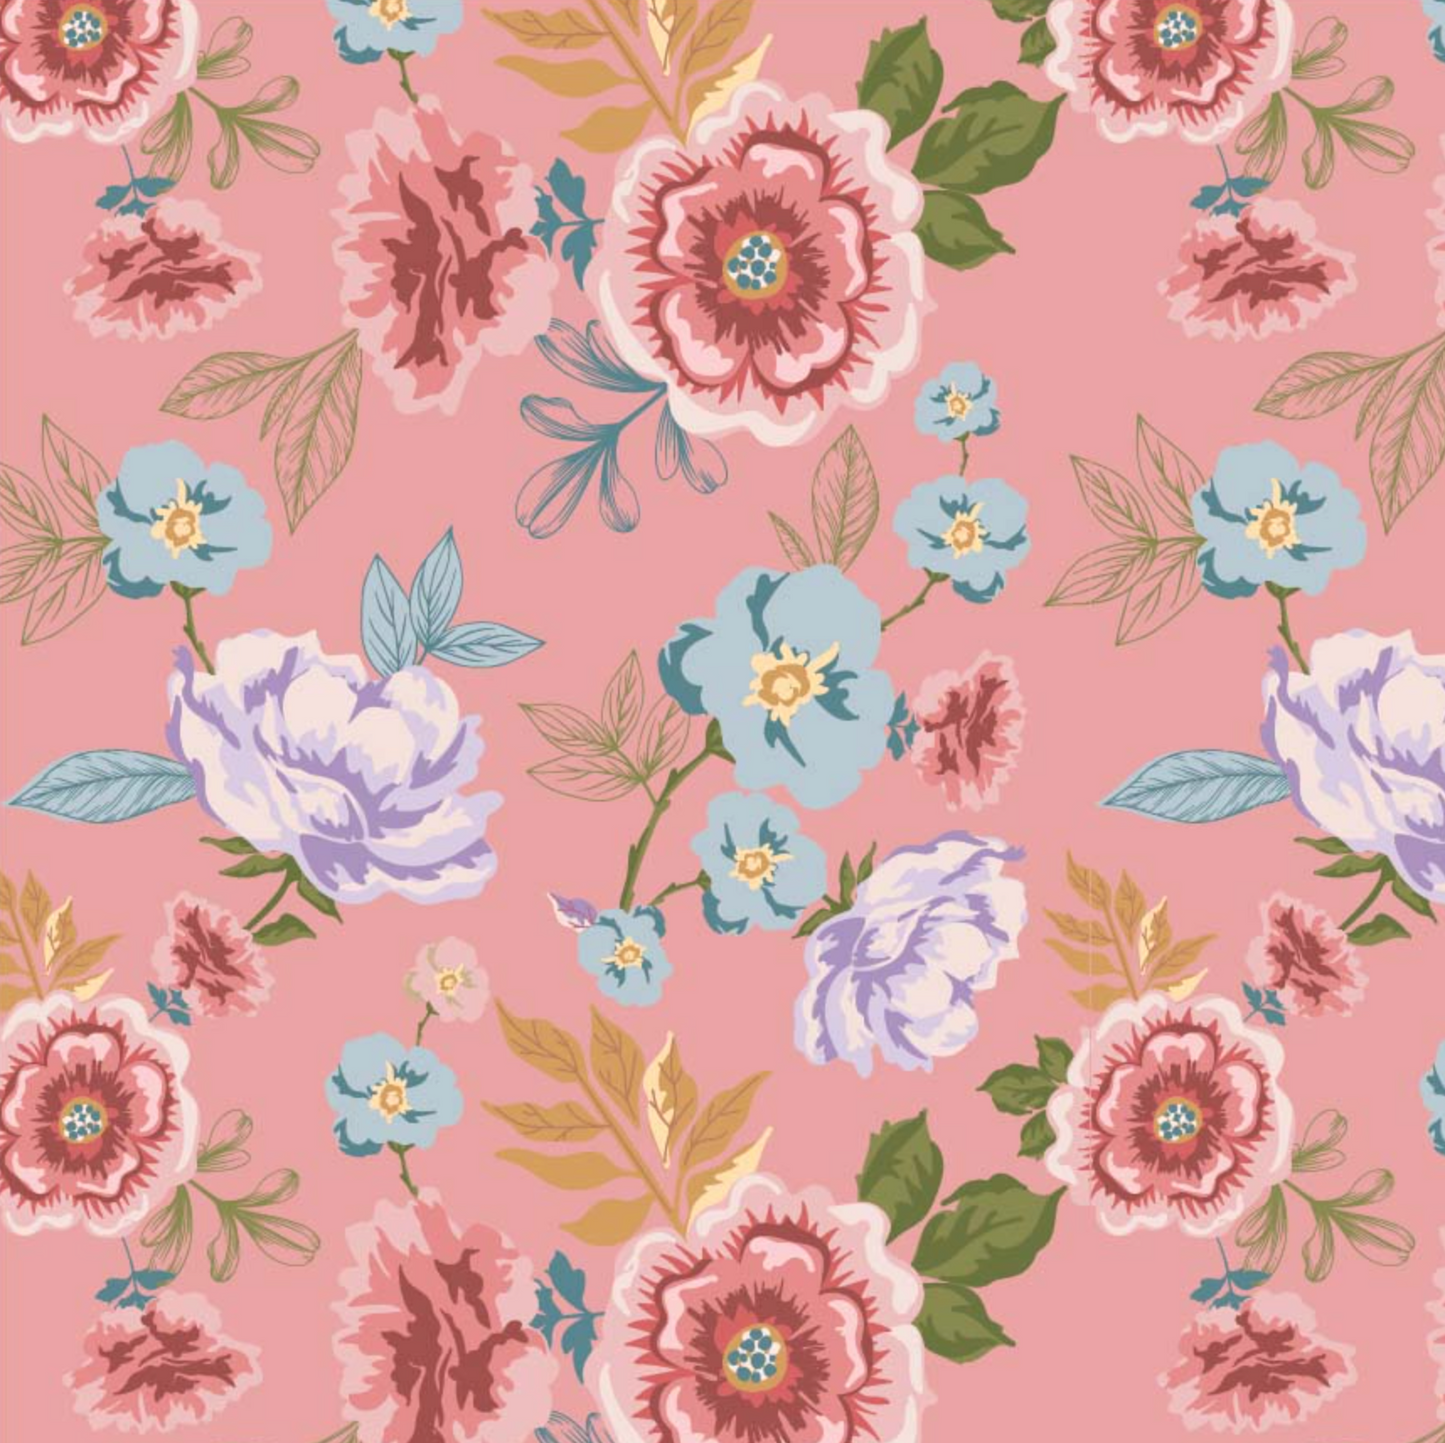 Nature Sings Fabric, Rose Garden, Pink, NS24121, sold by the 1/2 yard, *PREORDER